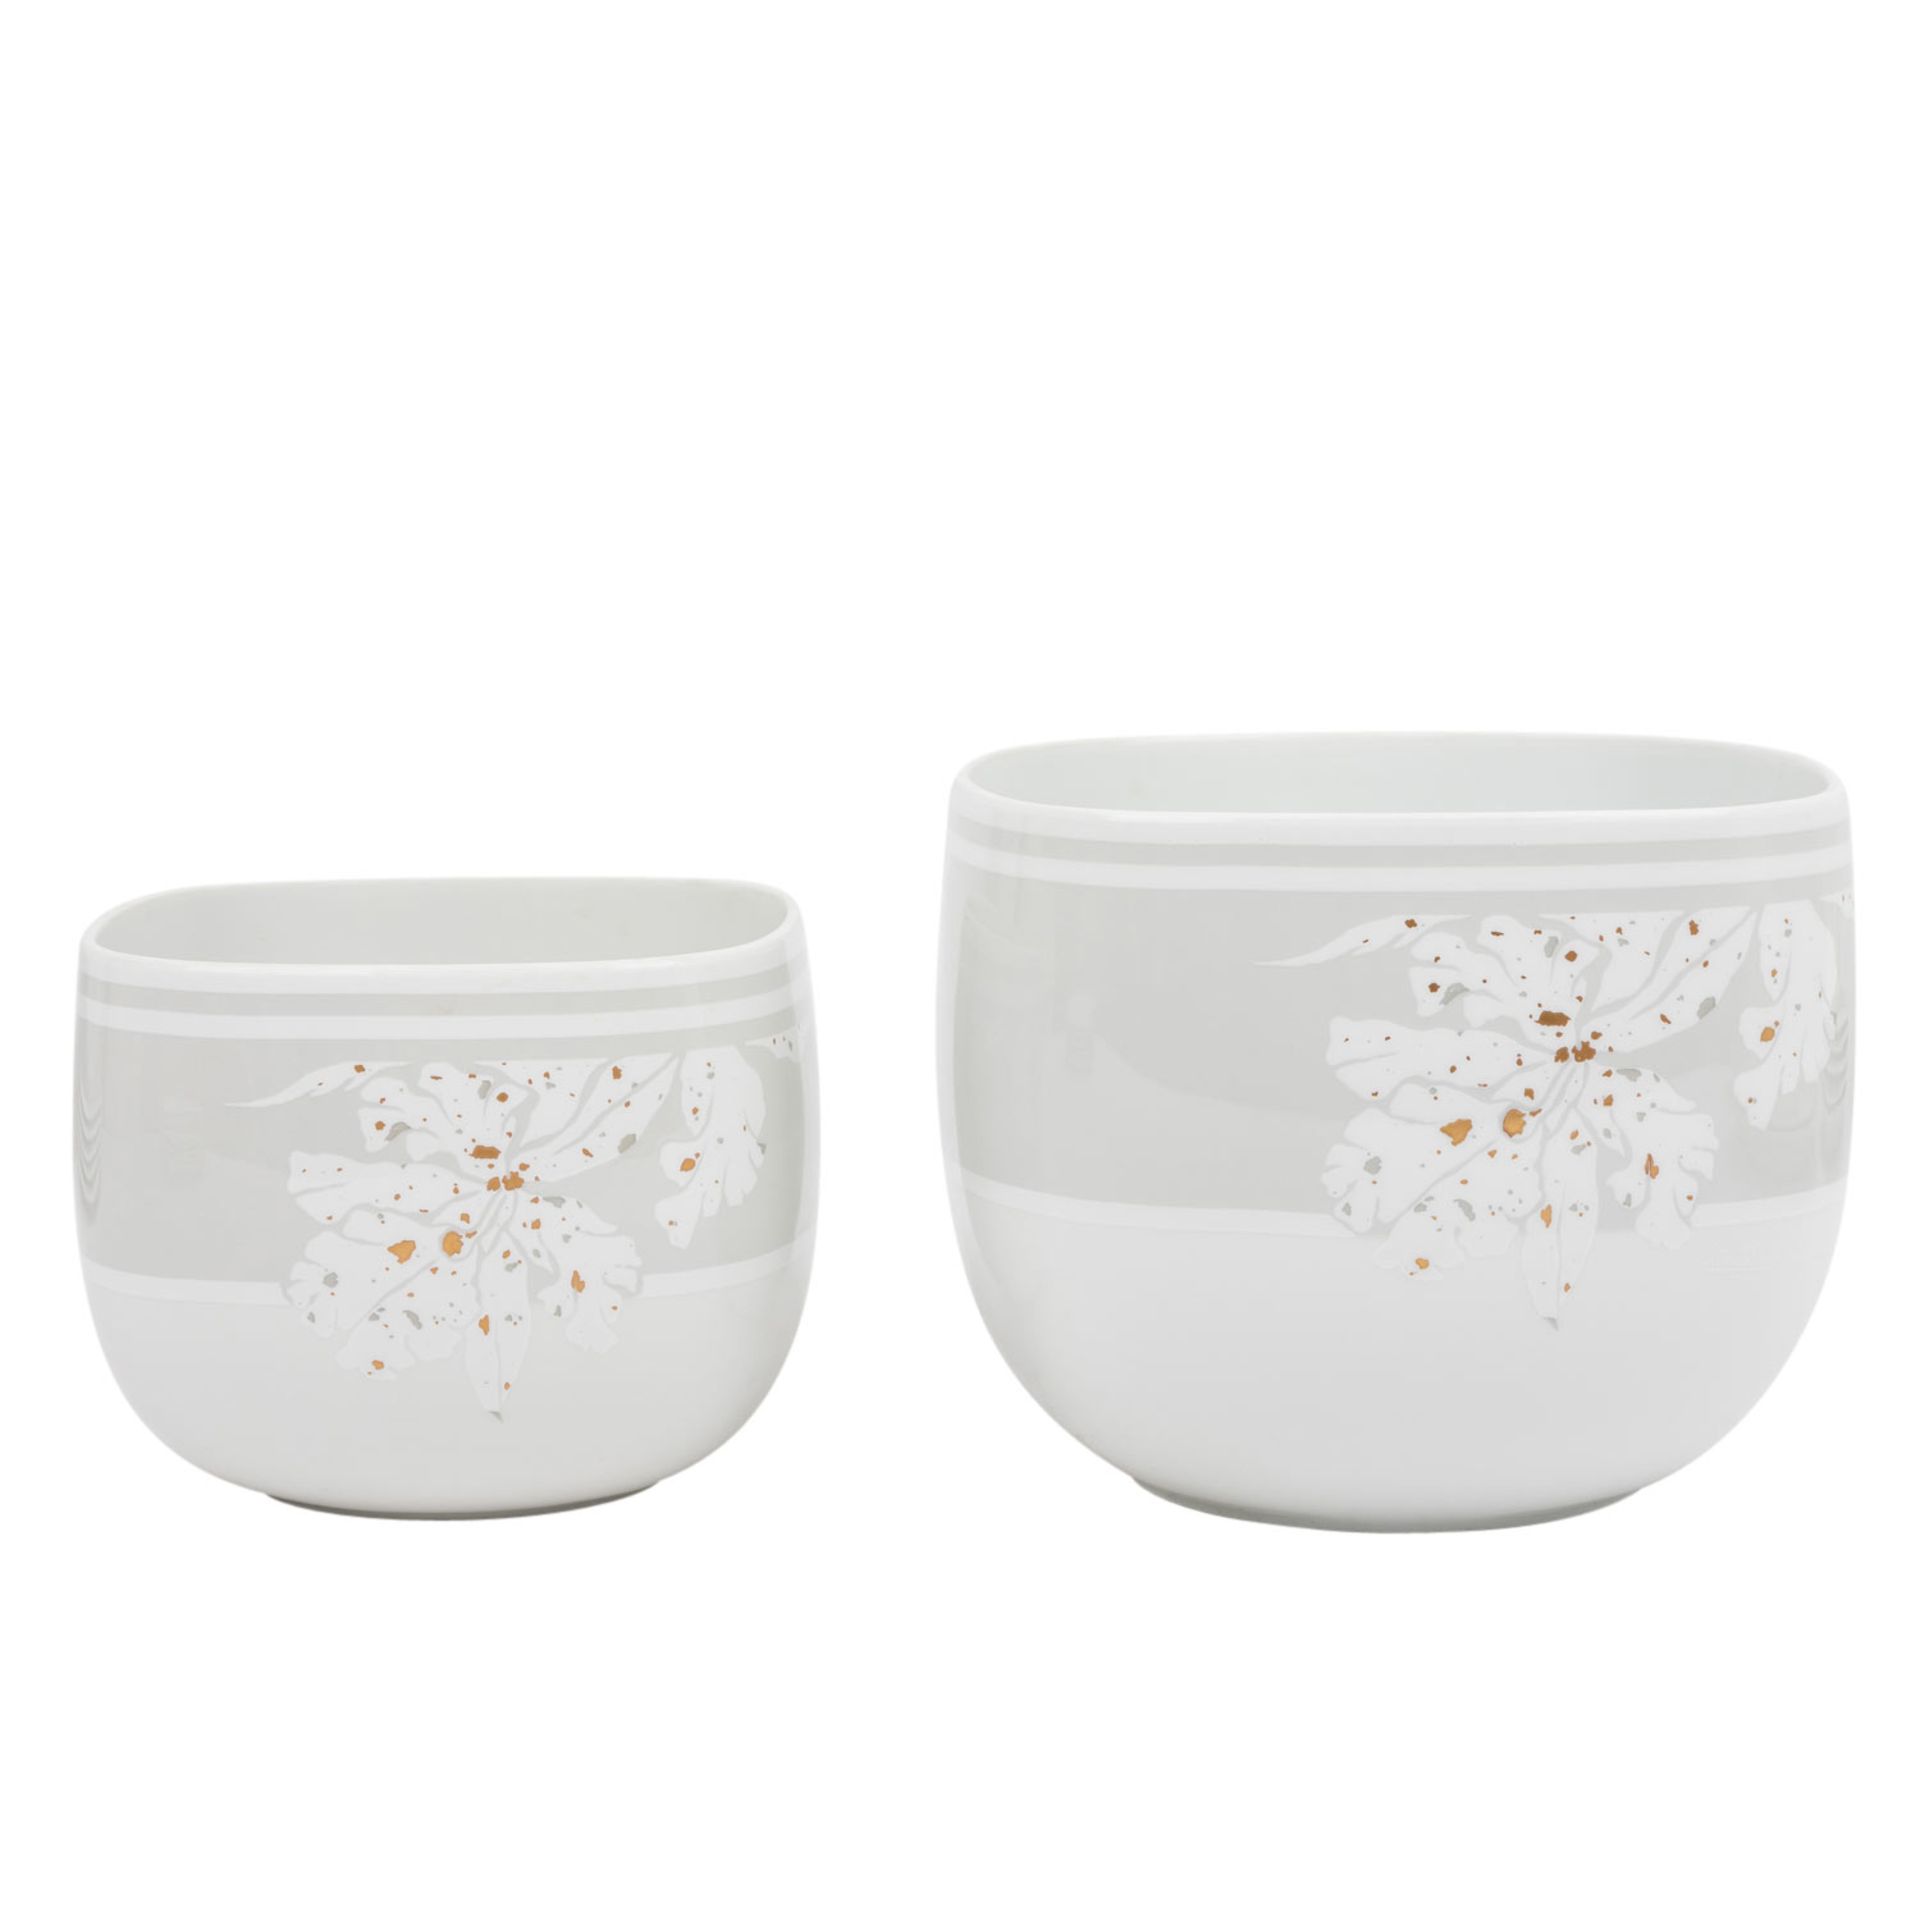 ROSENTHAL 25-tlg. Speiseservice 'Suomi, White Orchid', 20. Jh. - Image 3 of 6